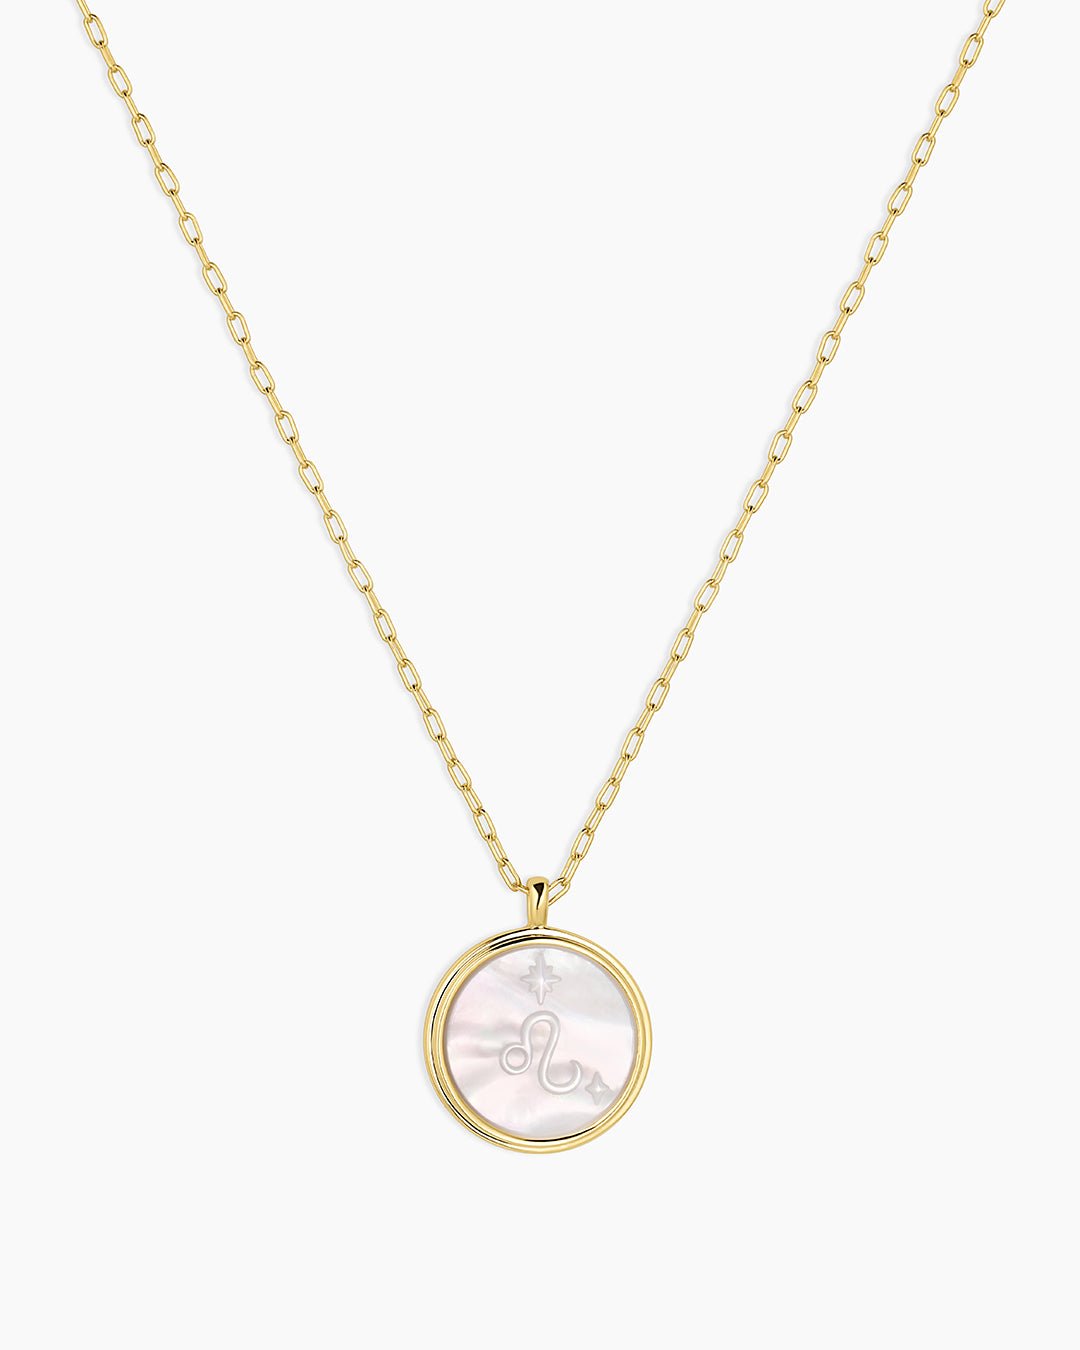 Zodiac Necklace - Scorpio, Astrology Coin Necklace, Scorpio Necklace || option::Gold Plated, Leo